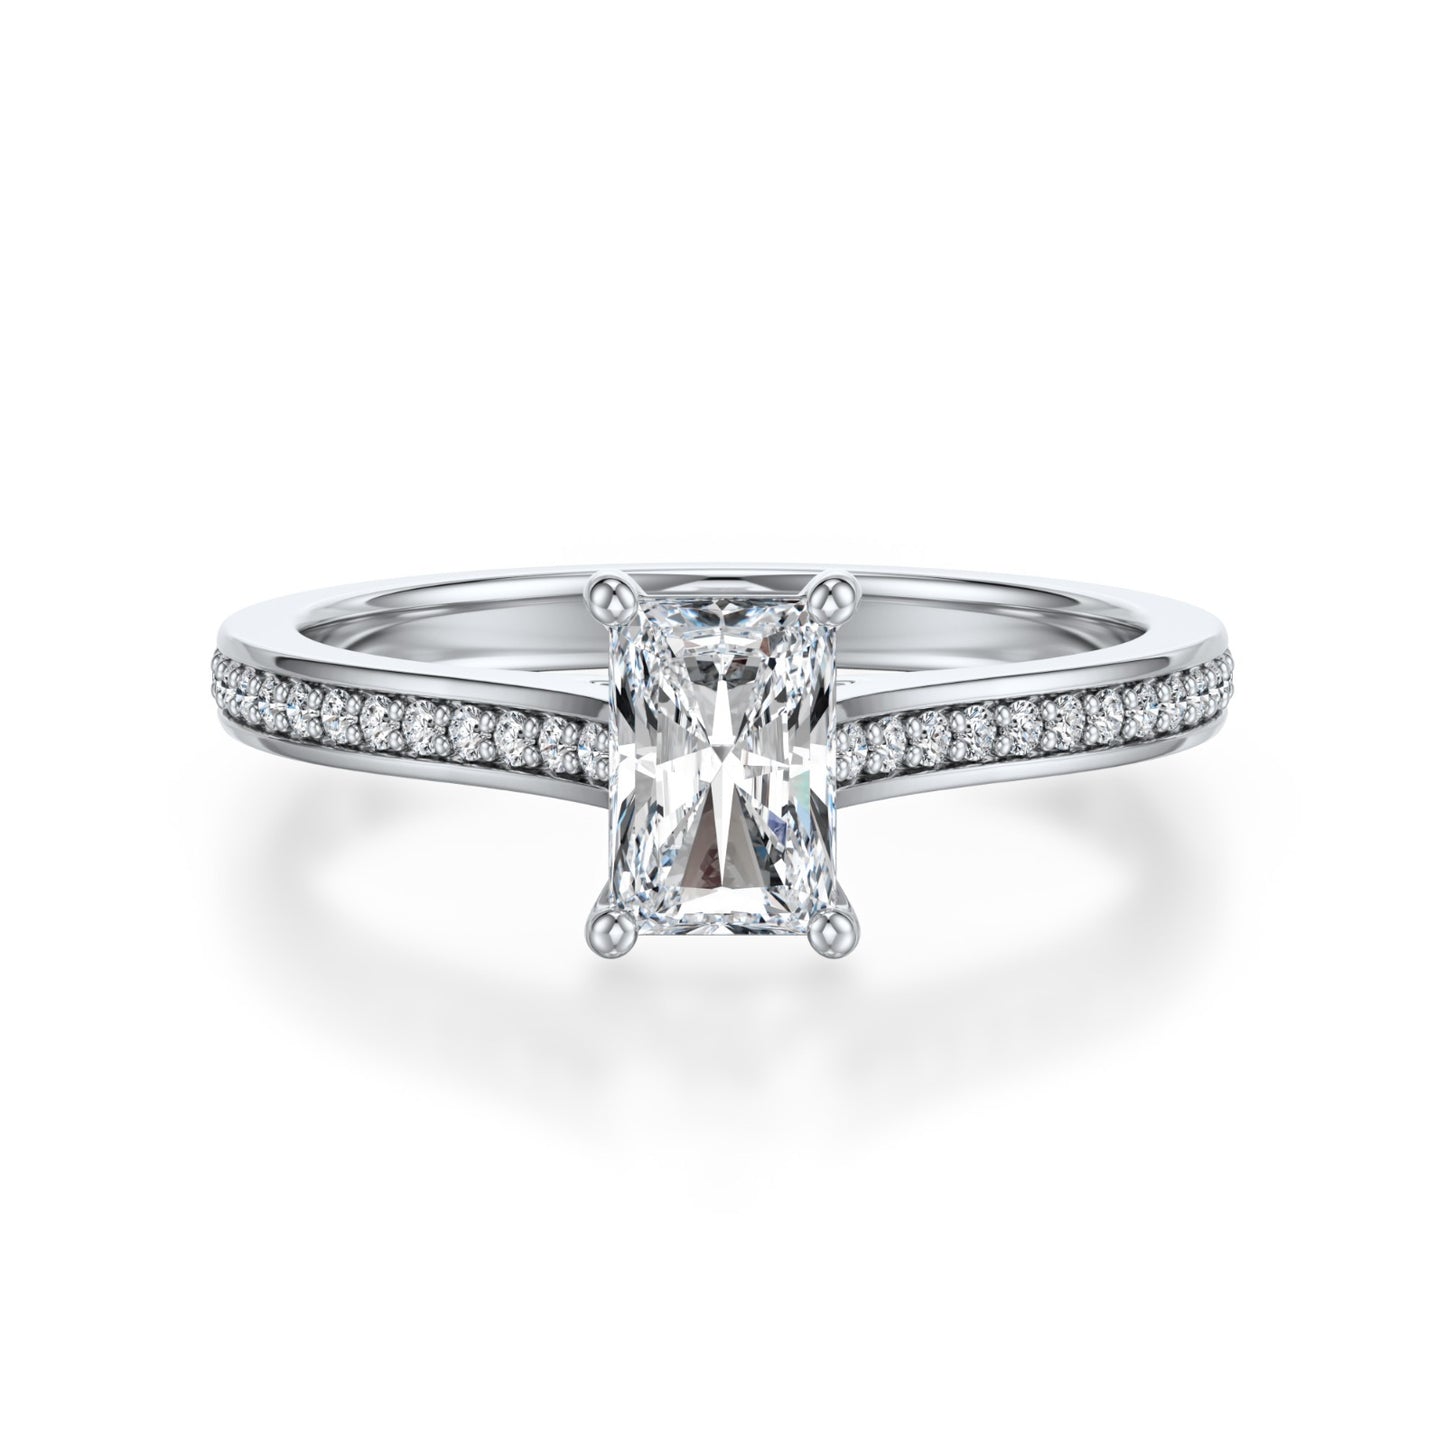 Radiant Pave Diamond ring in White Gold